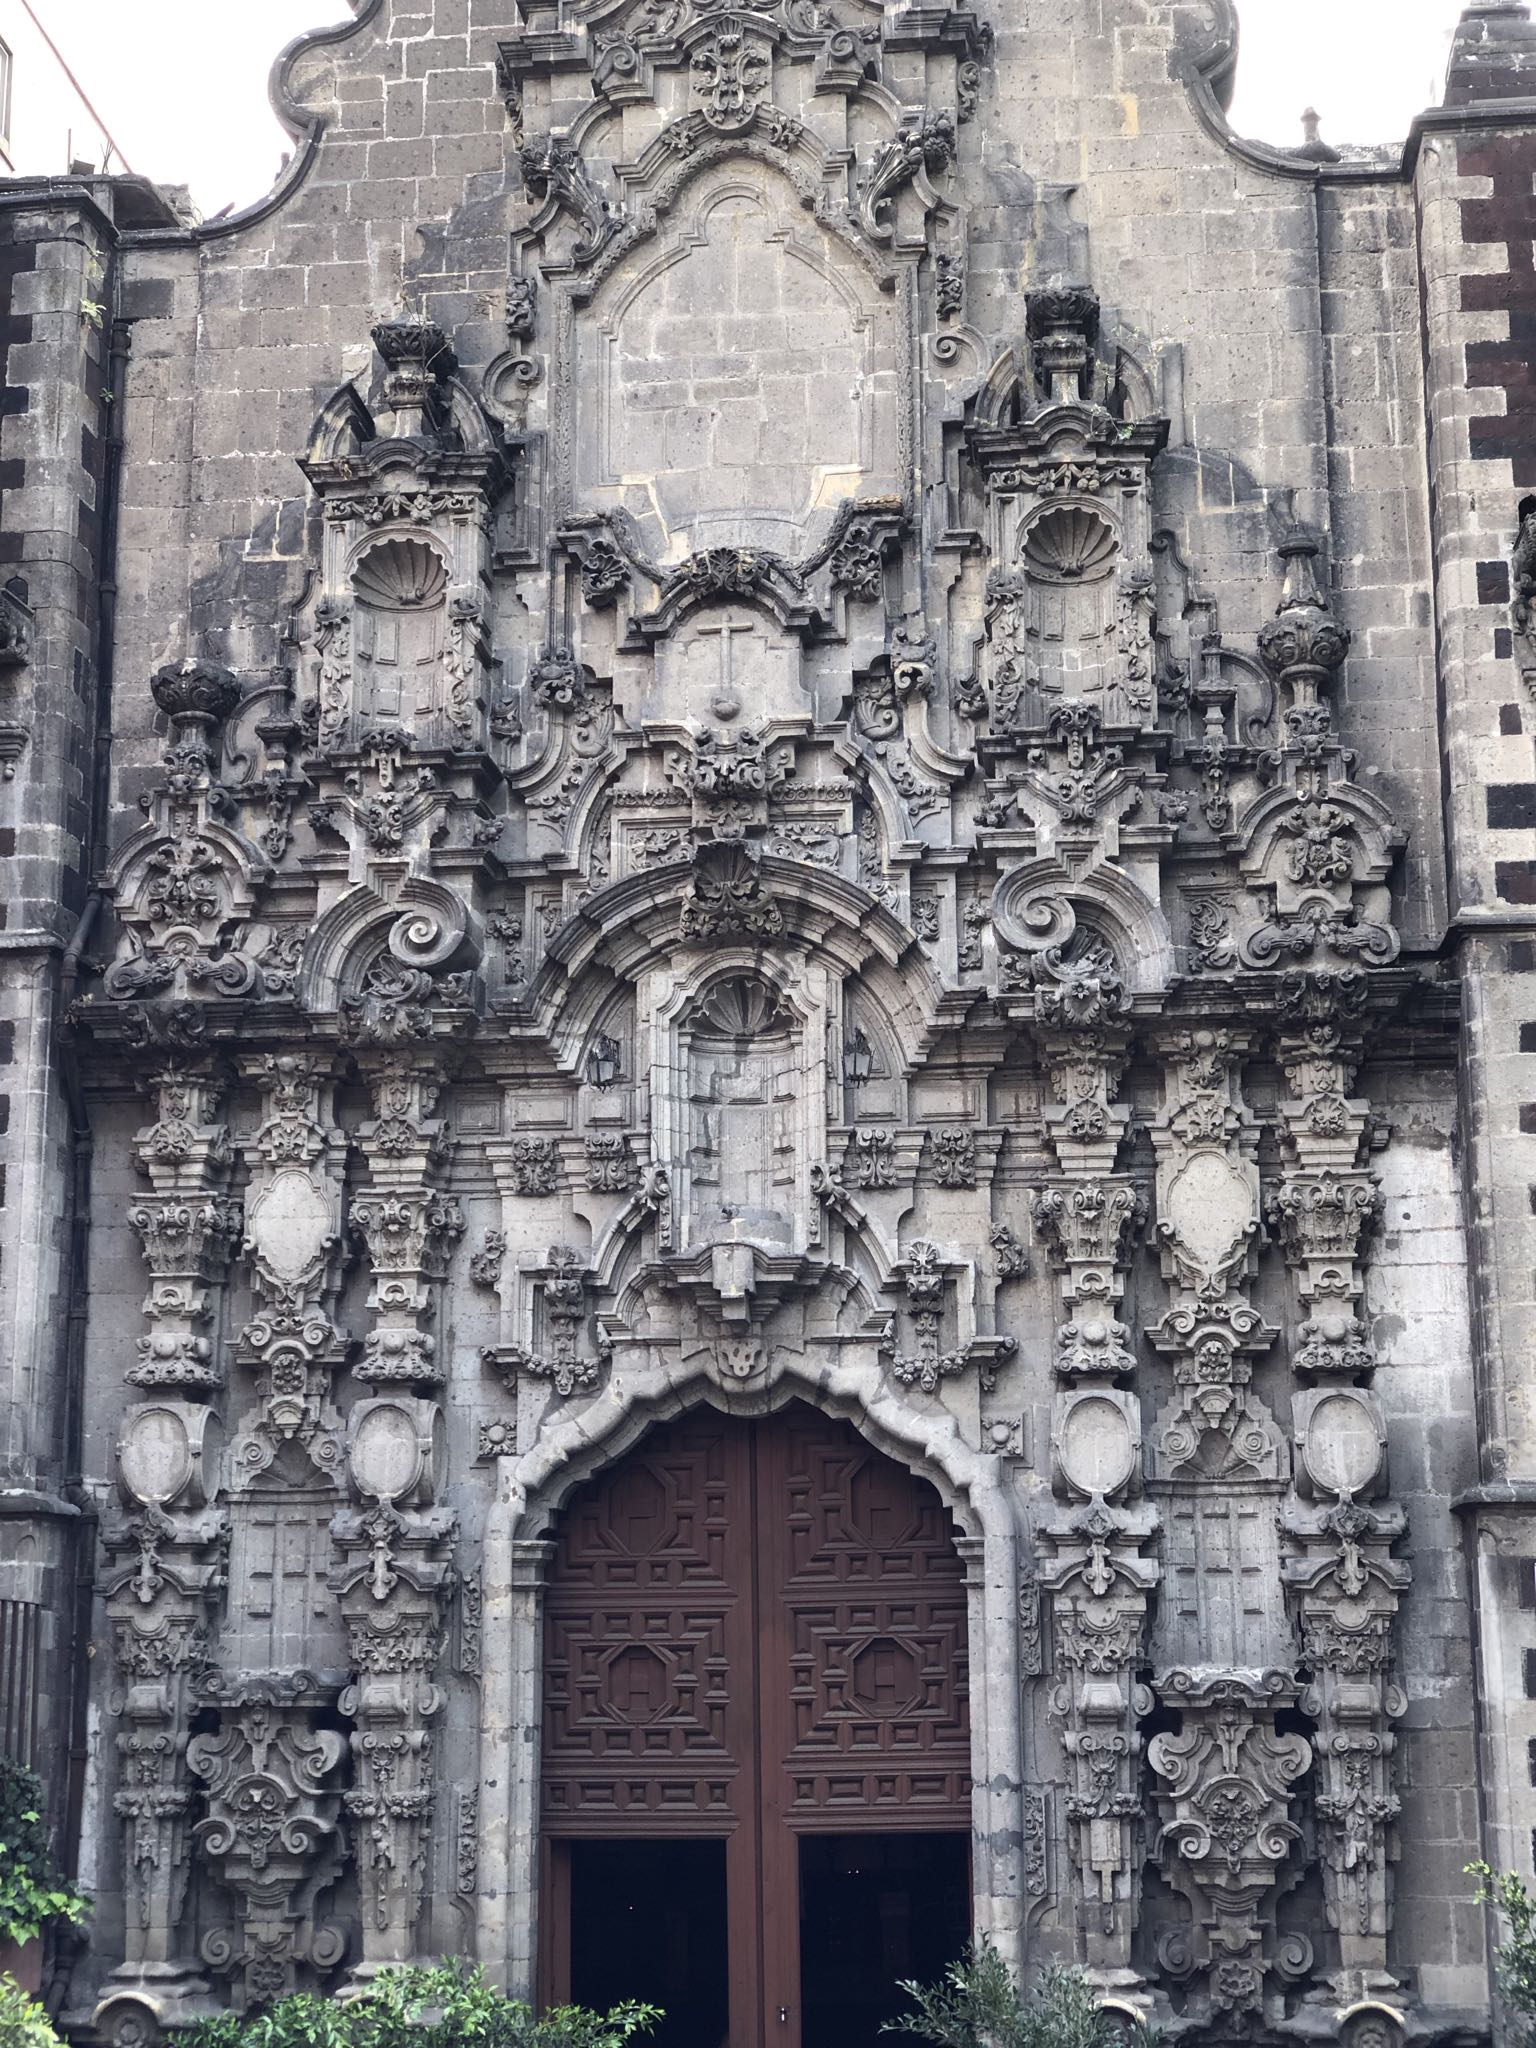 Photo 43 of 362 from the album Highlights Mexico 2019.